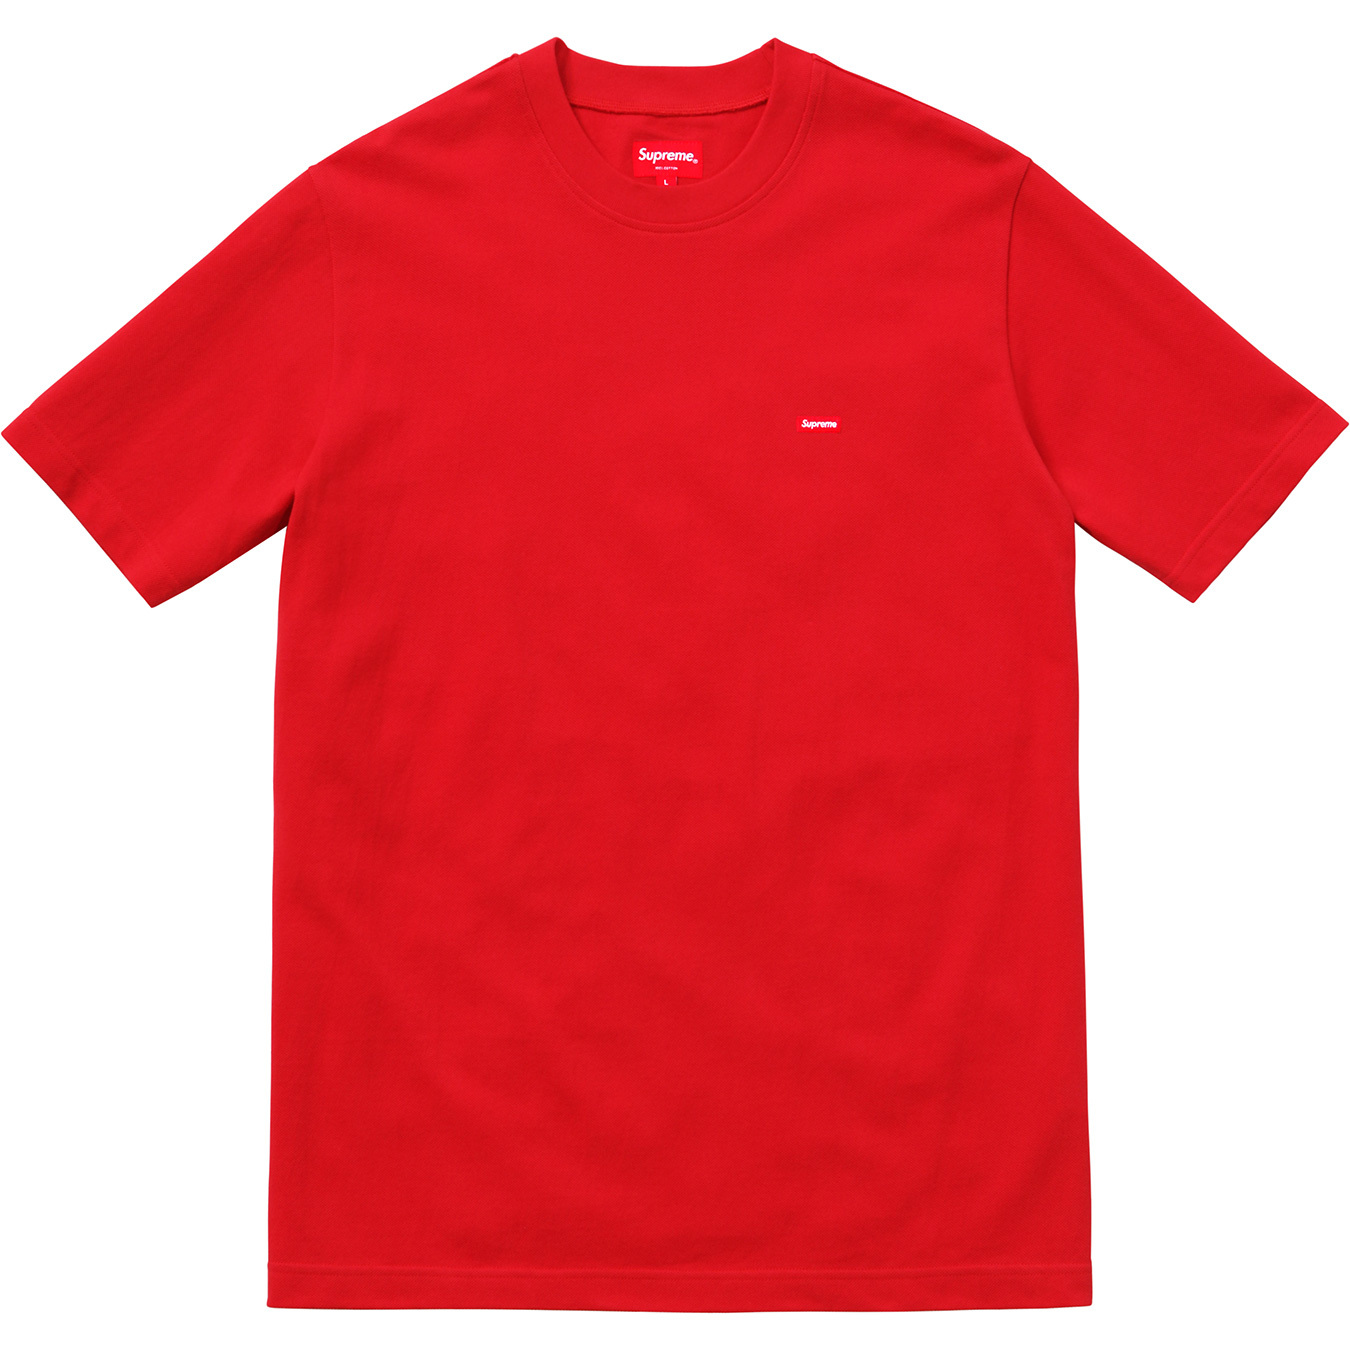 Supreme Small Box Pique Tee Red Men's - FW17 - US